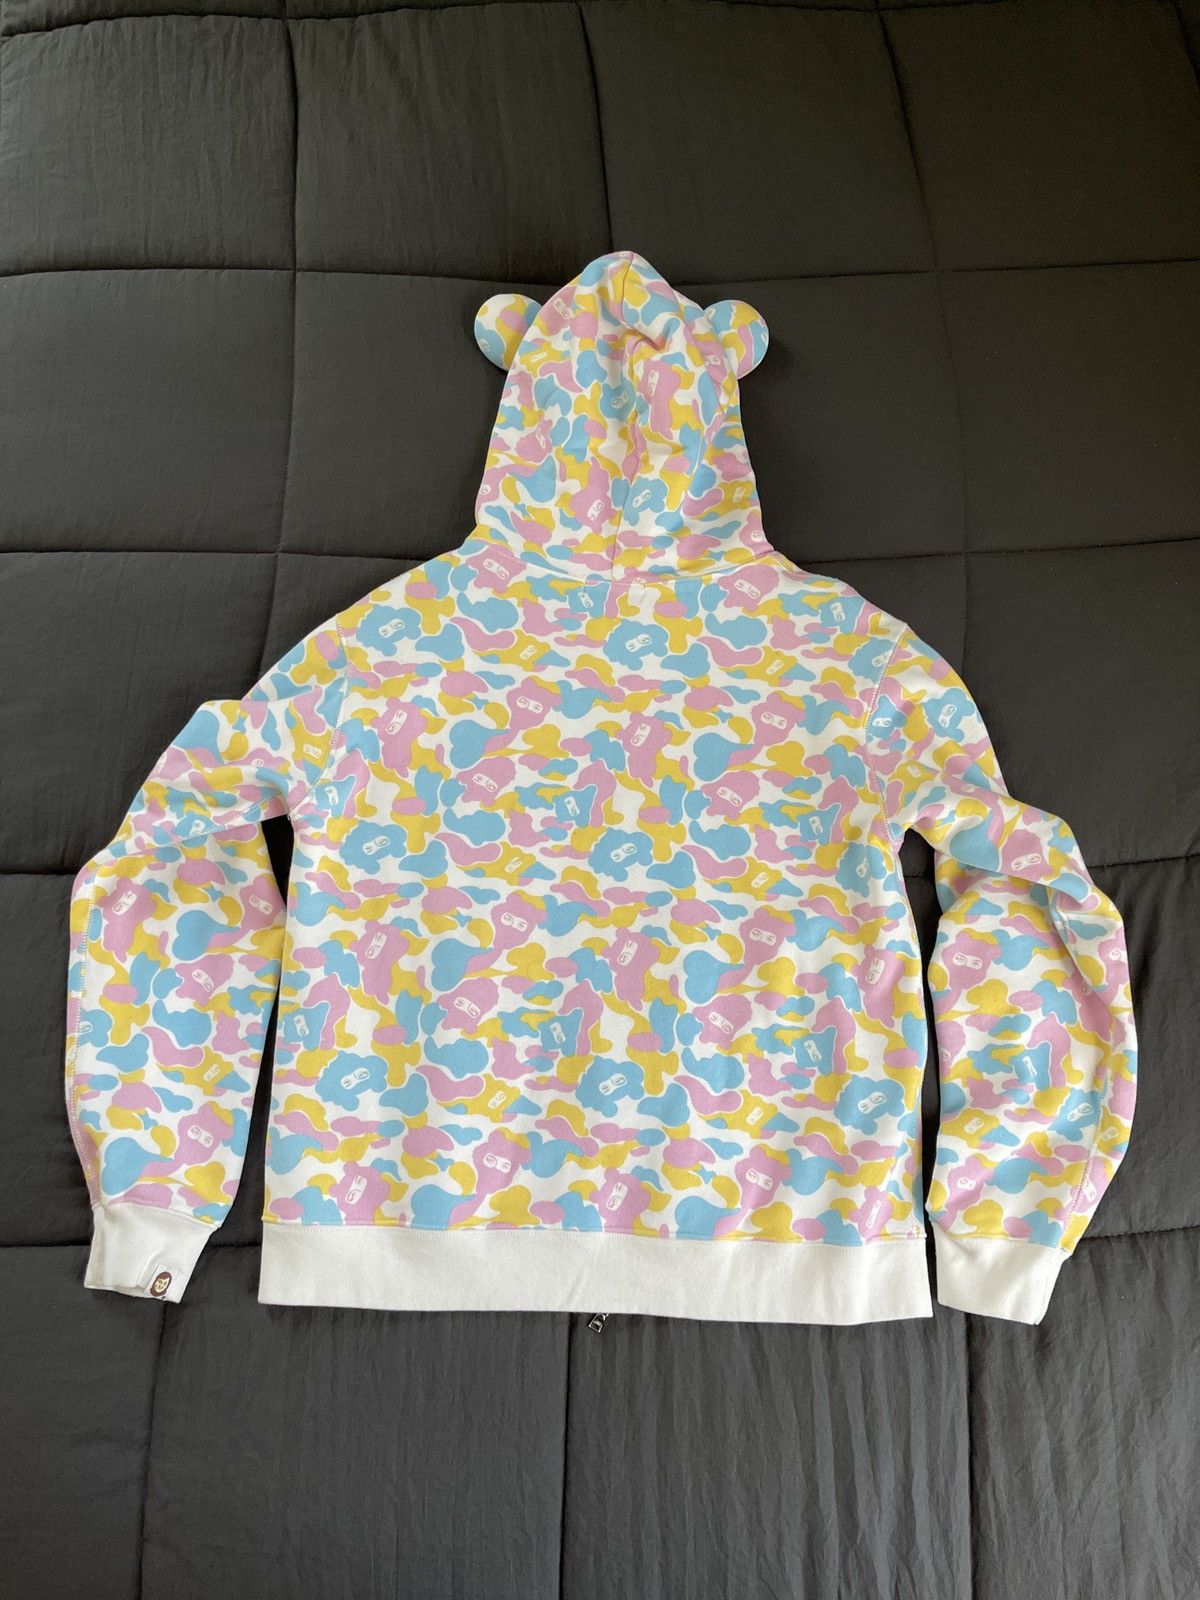 Japanese Brand Jose Wong ABCD Cotton Candy Full Zip Hoodie Size US M / EU 48-50 / 2 - 2 Preview